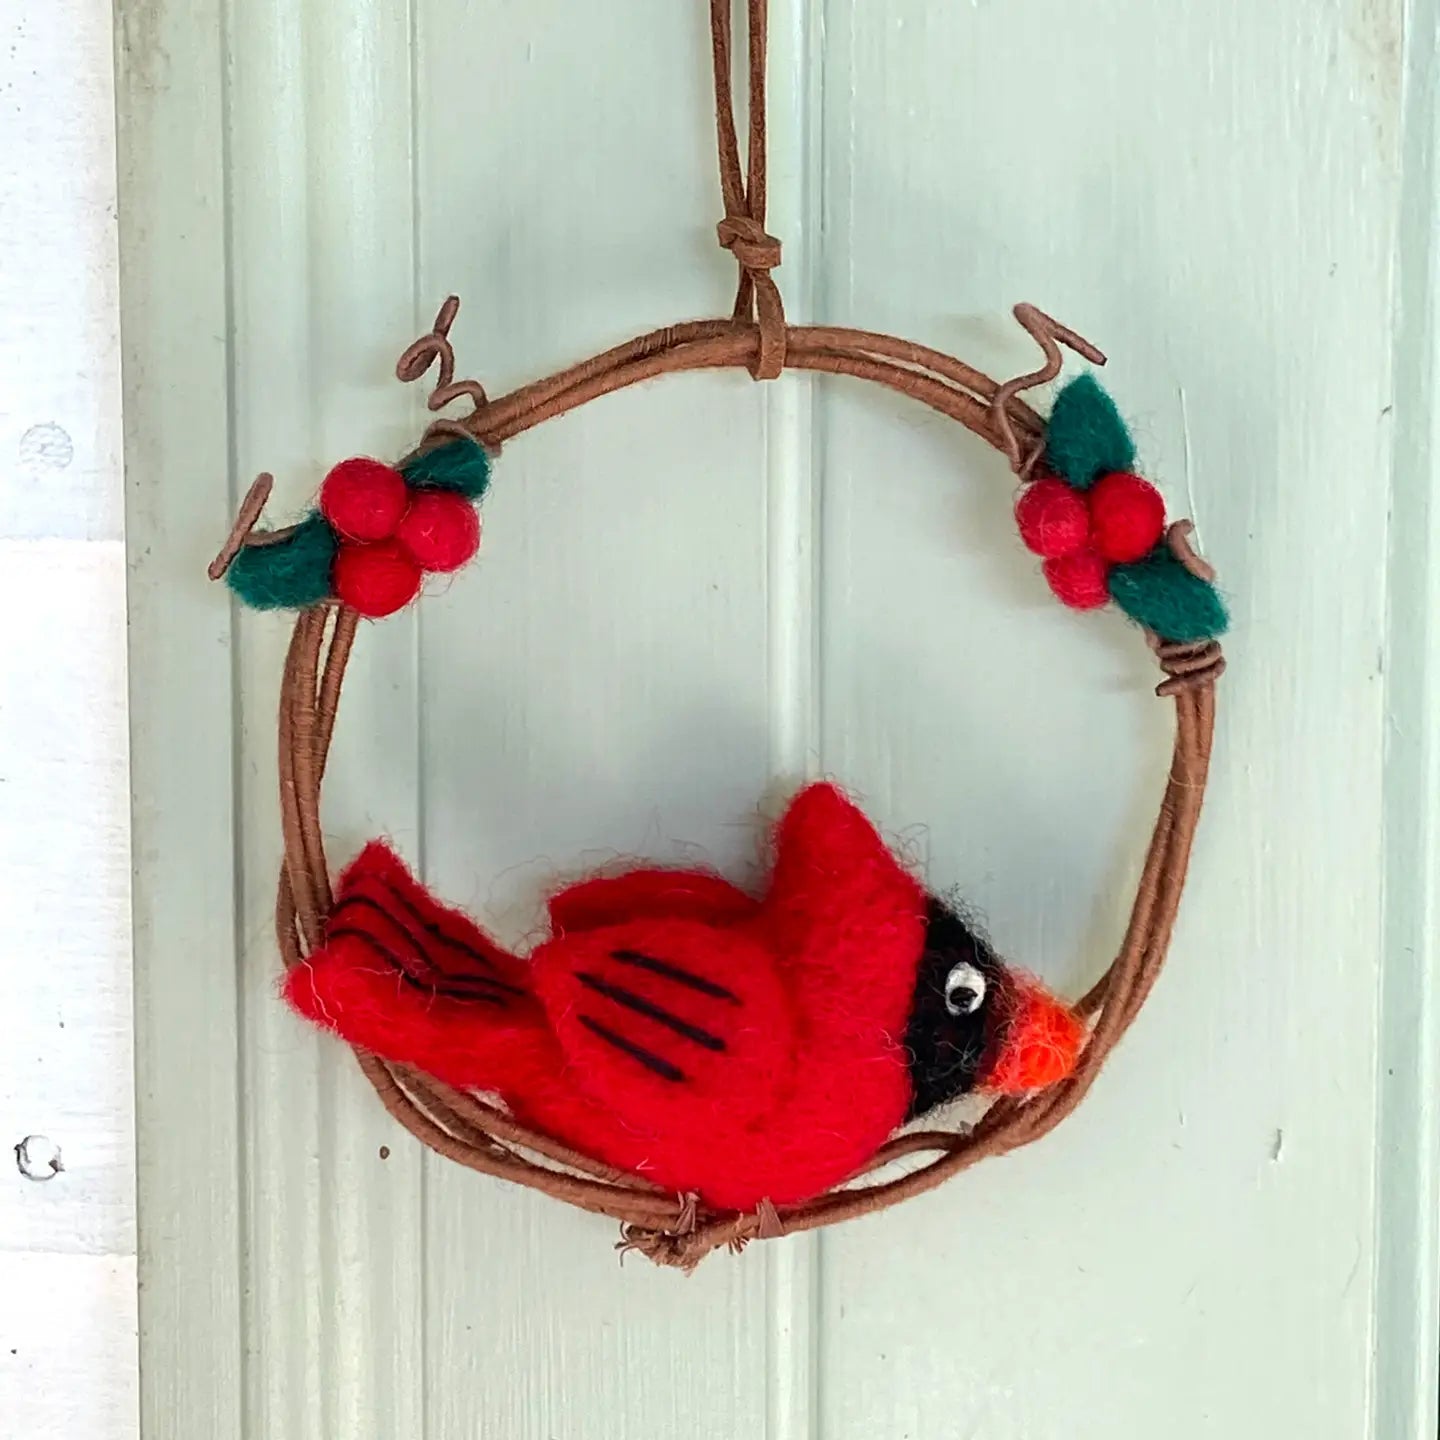 Mini Wreath with Felted Spring Characters!